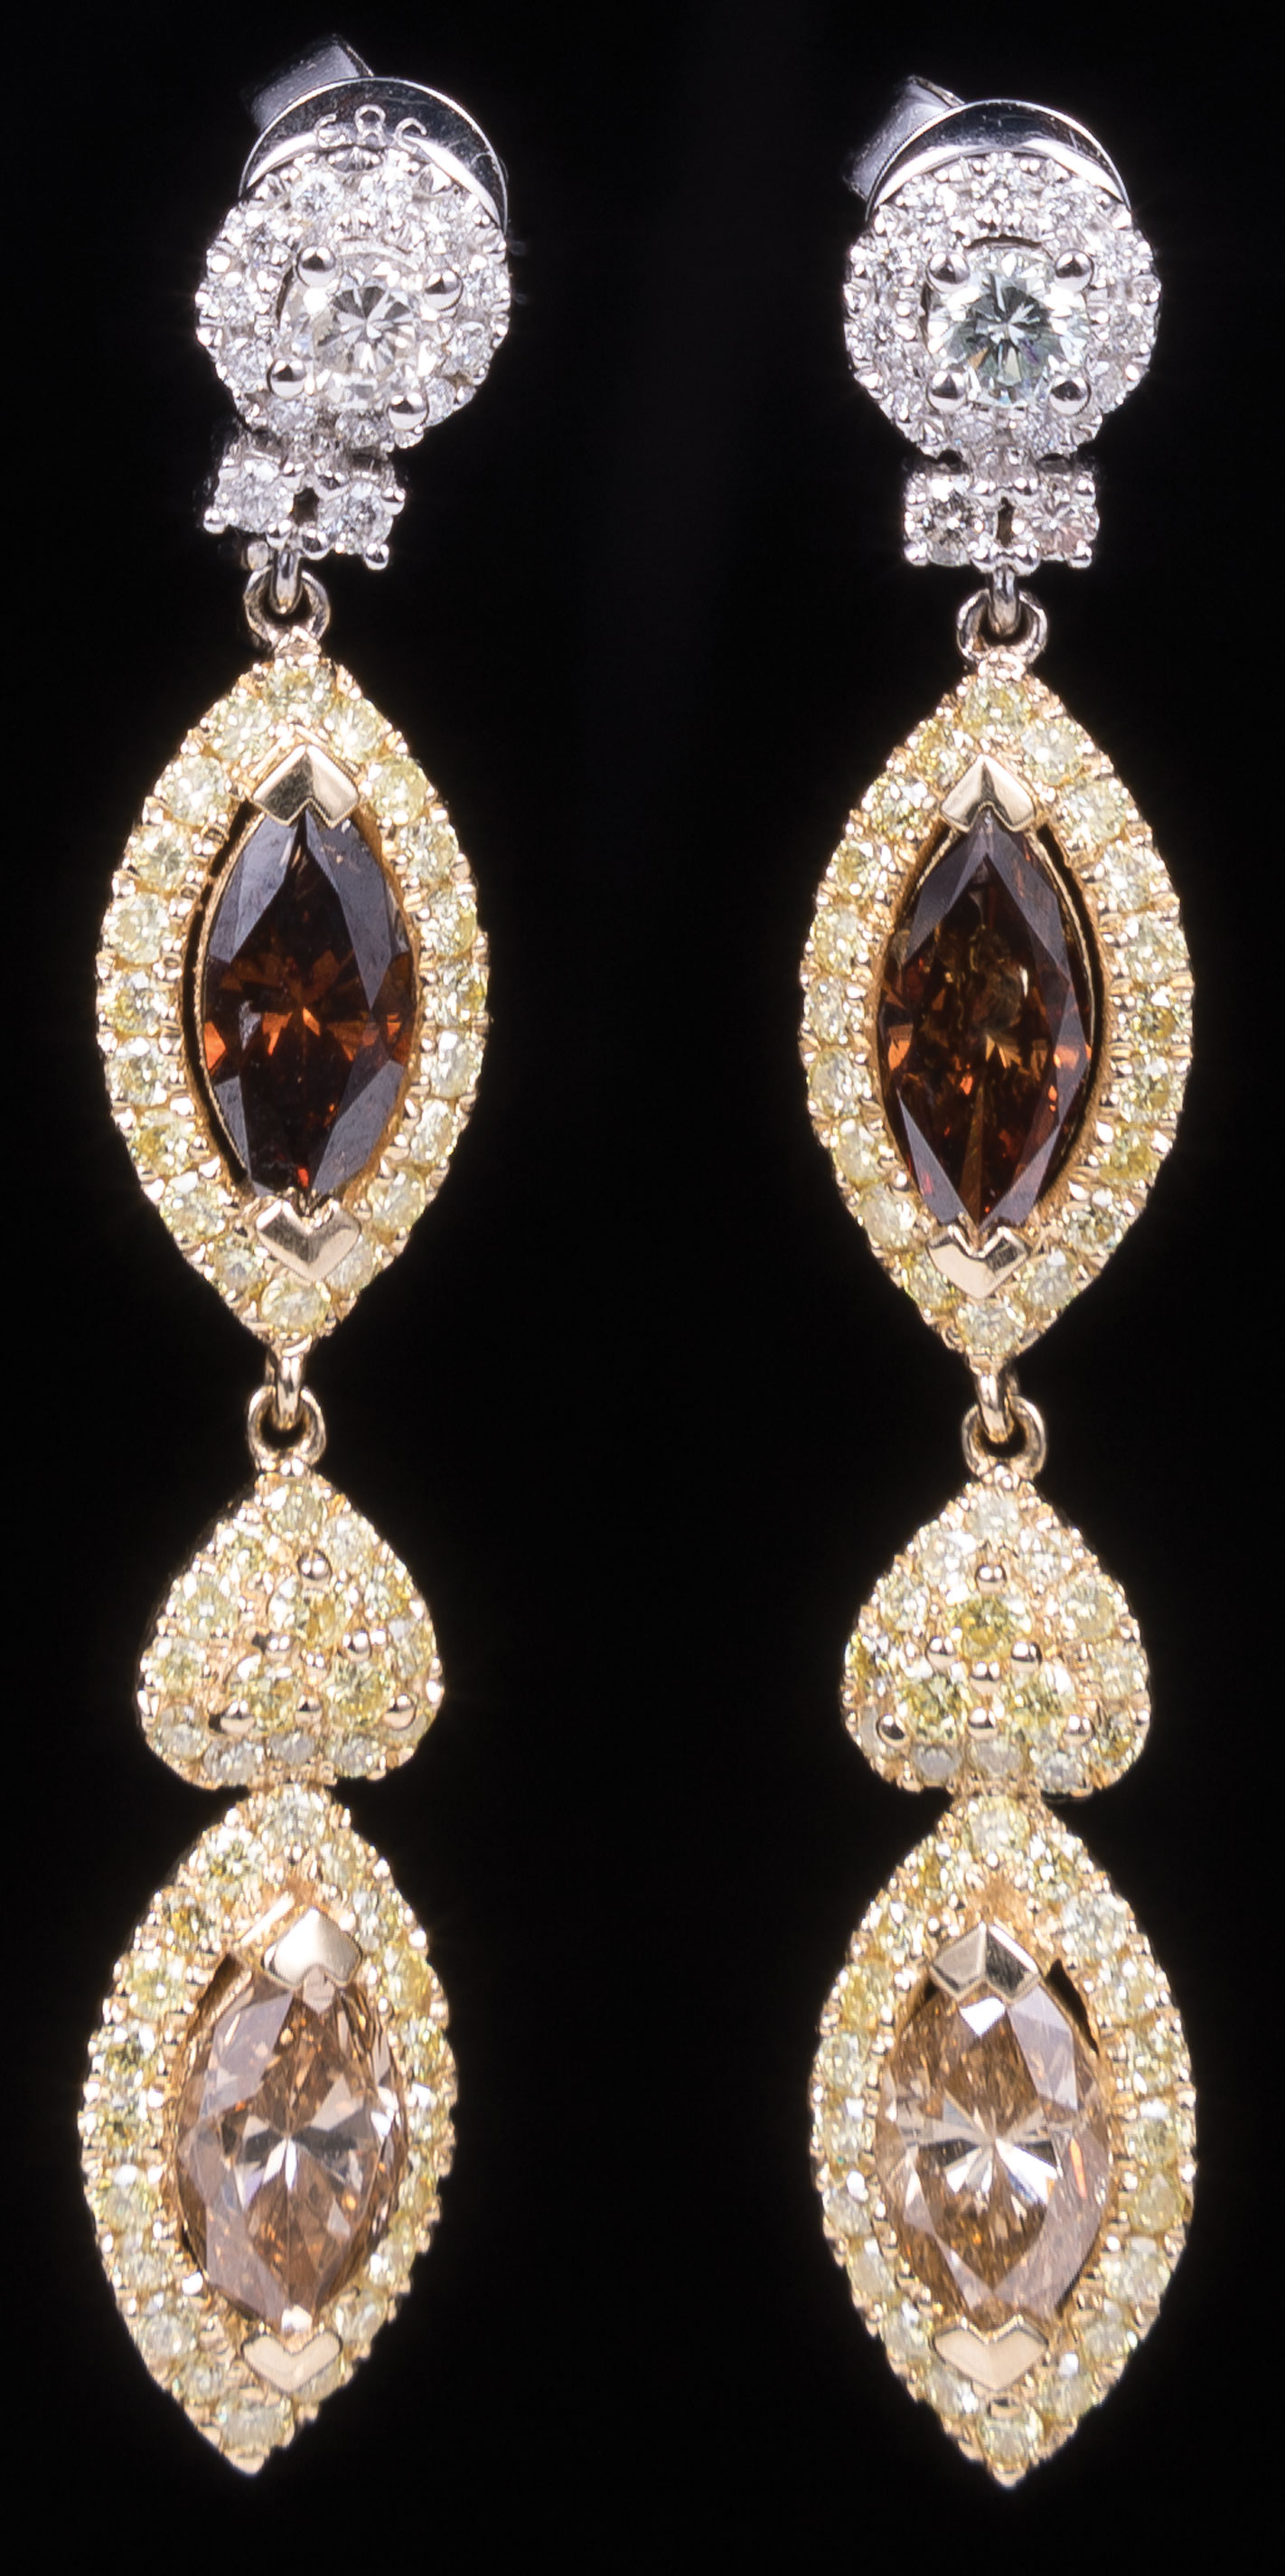 Pair of 14 kt. White and Yellow Gold, Brown Diamond, Yellow Diamond, and Colorless Diamond Dangle